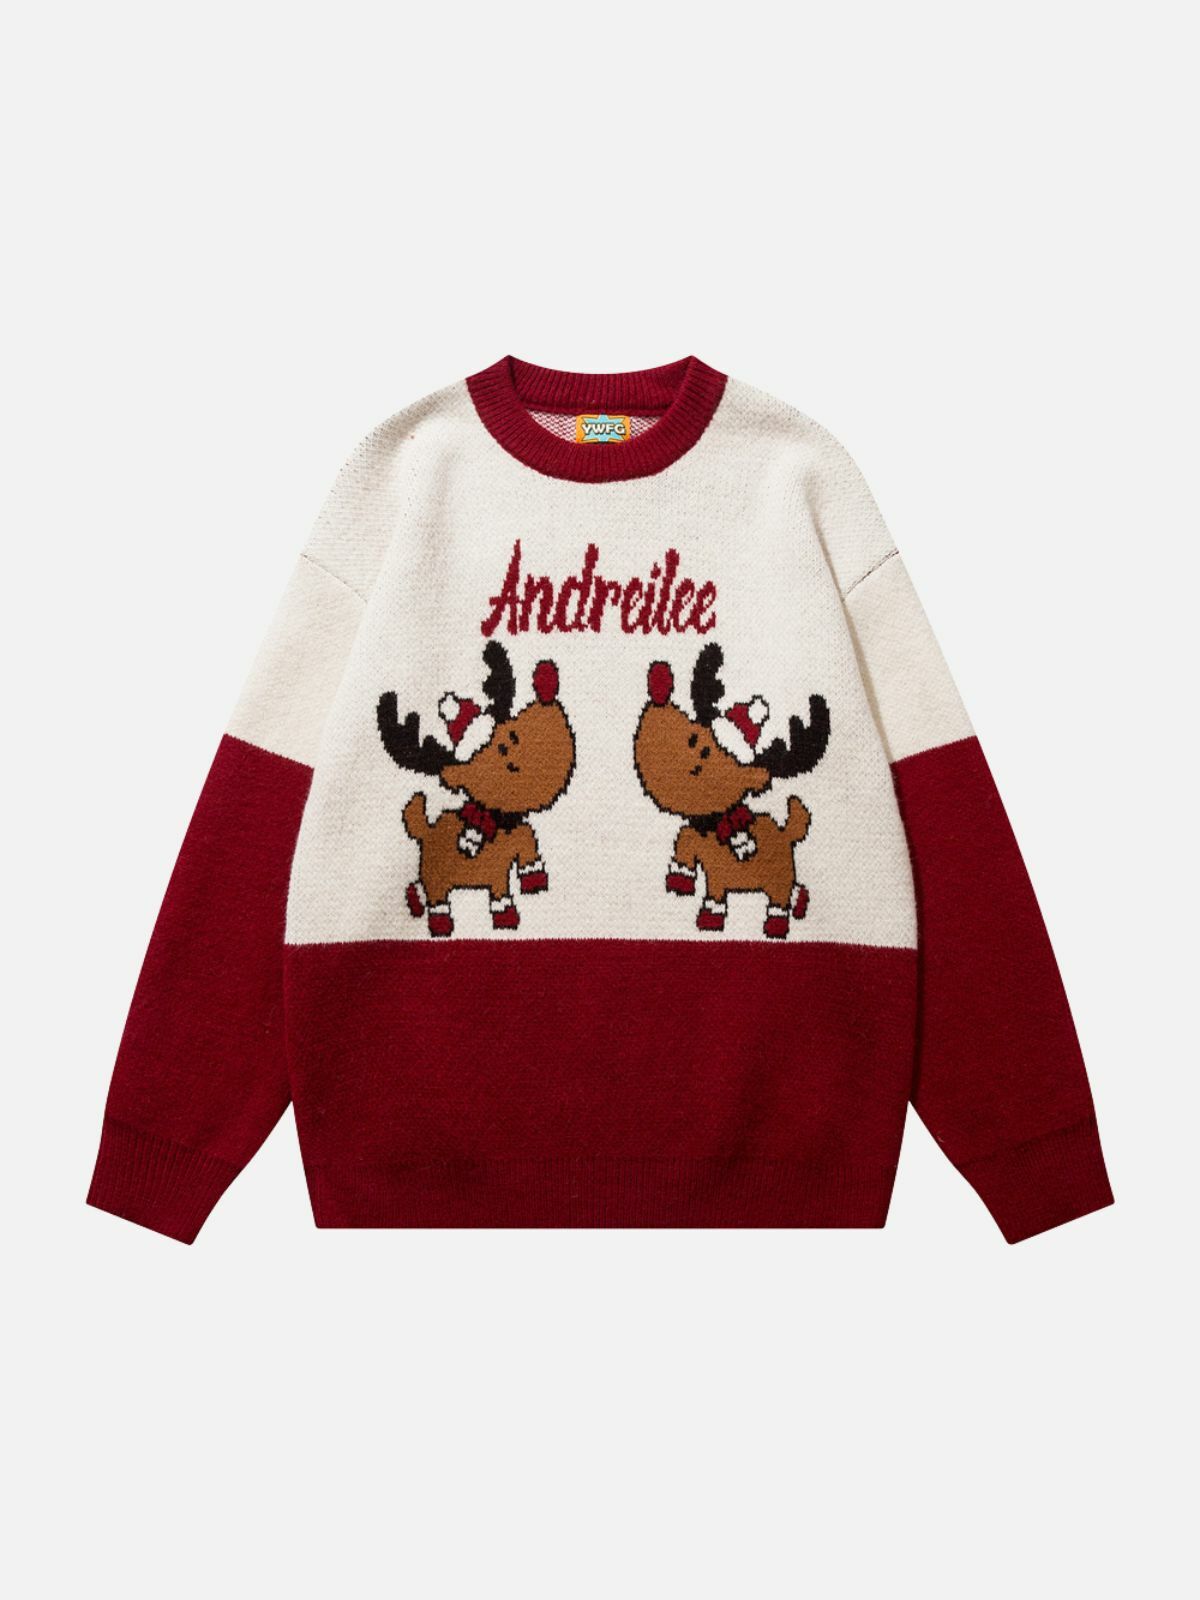 festive deer graphic sweater vibrant holiday fashion 6713